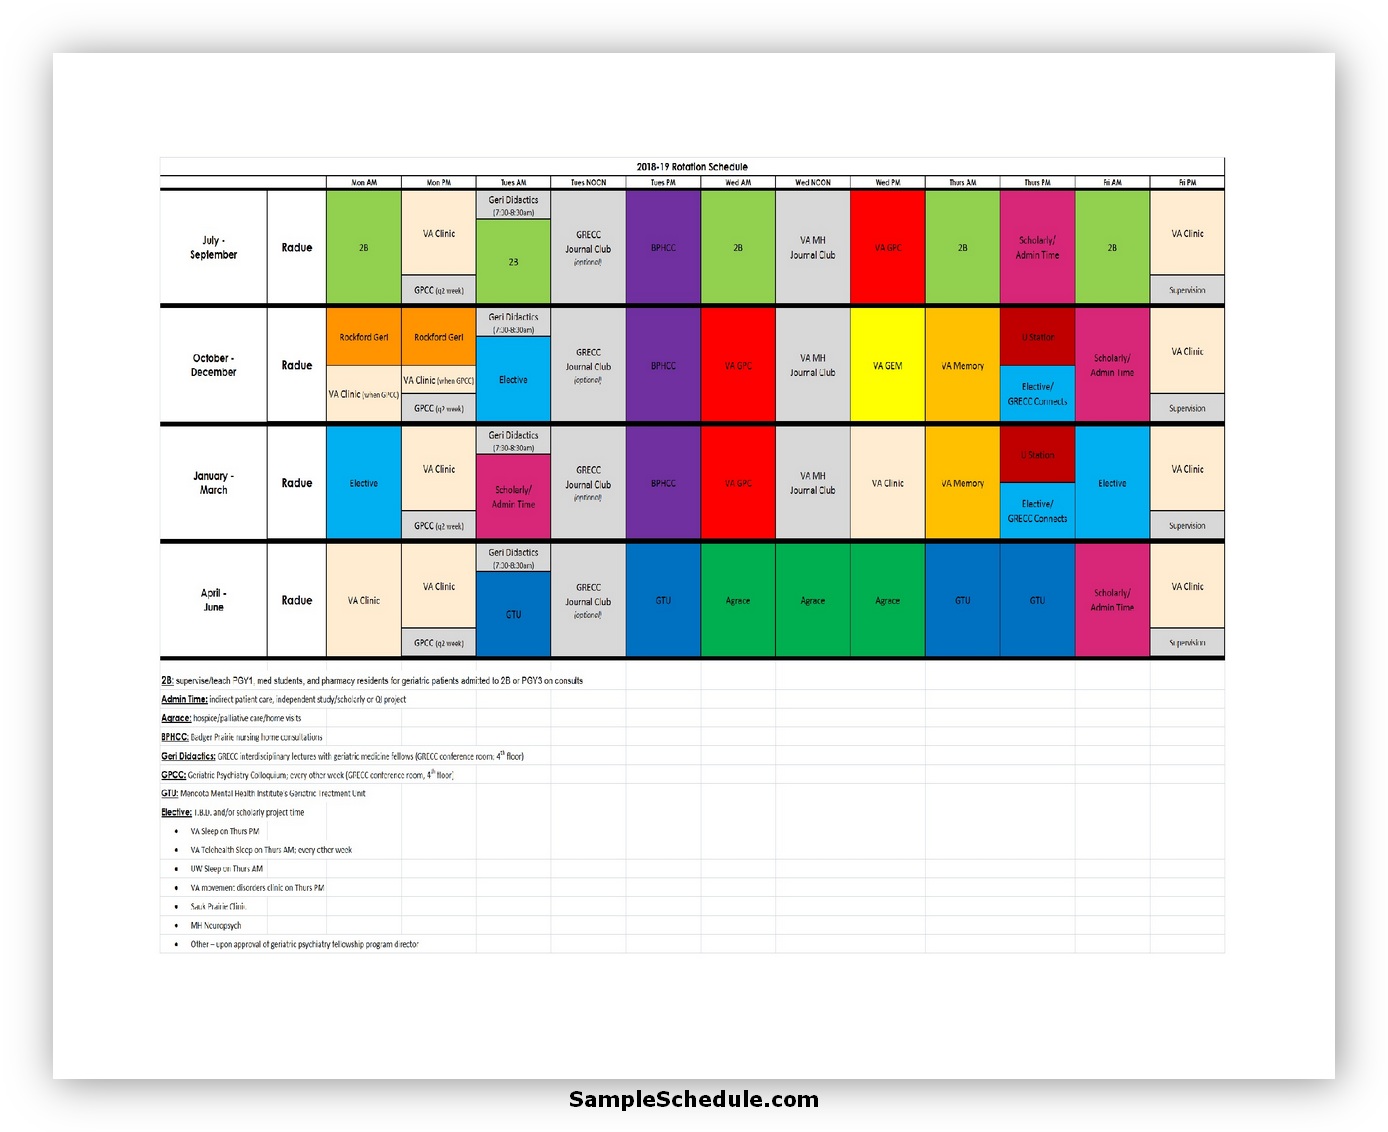 51 Free Rotation Schedule Template sample schedule